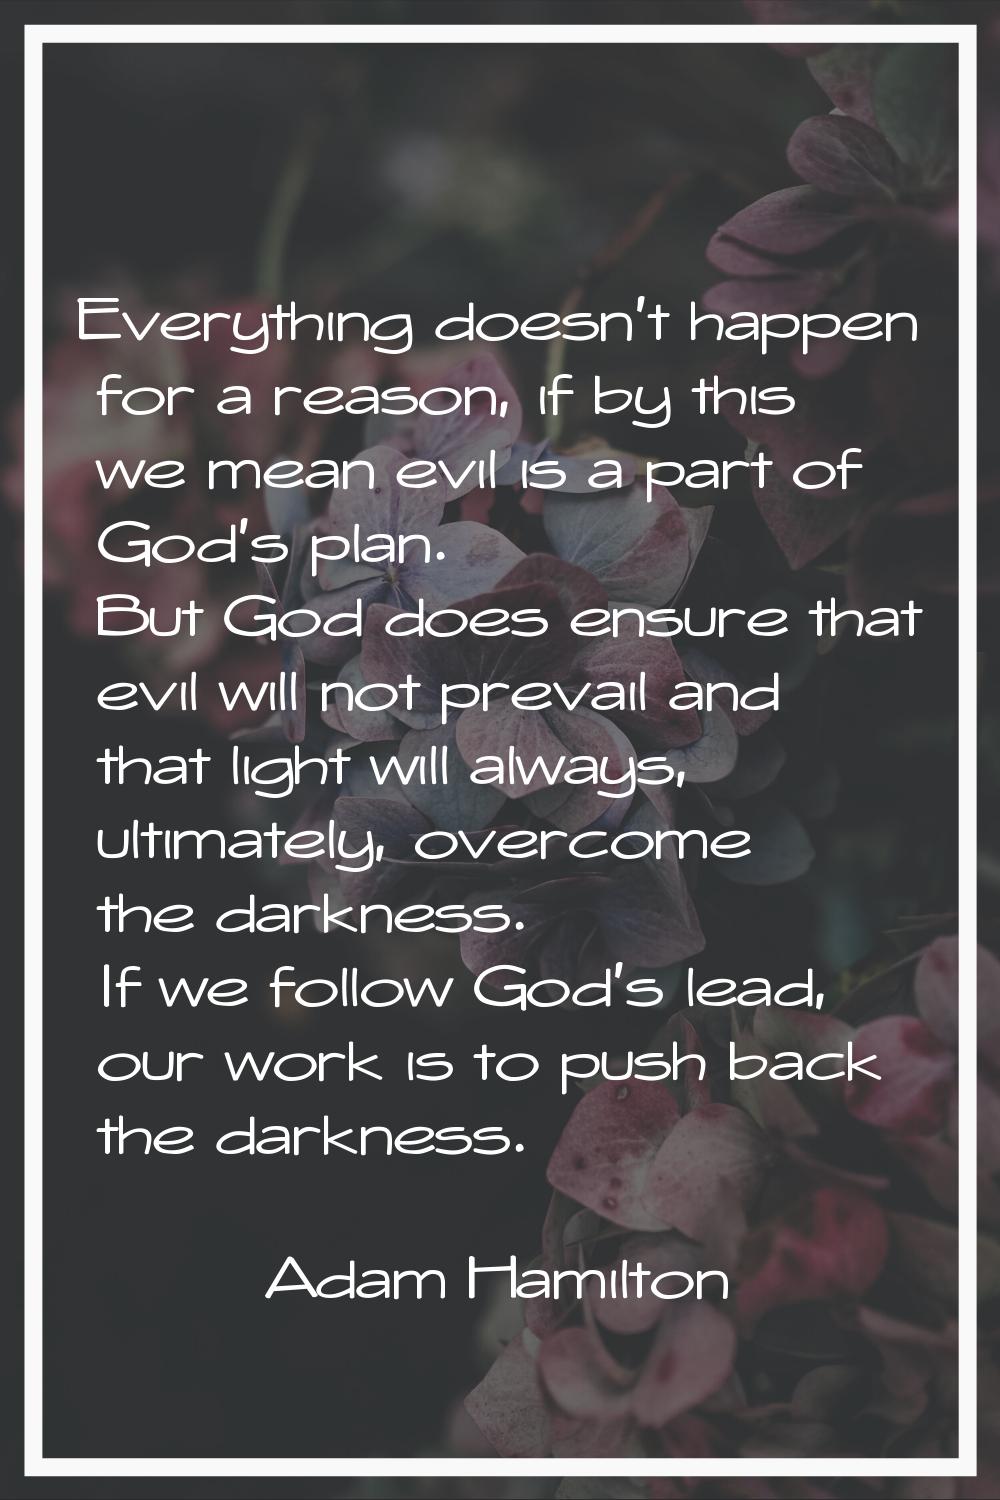 Everything doesn't happen for a reason, if by this we mean evil is a part of God's plan. But God do